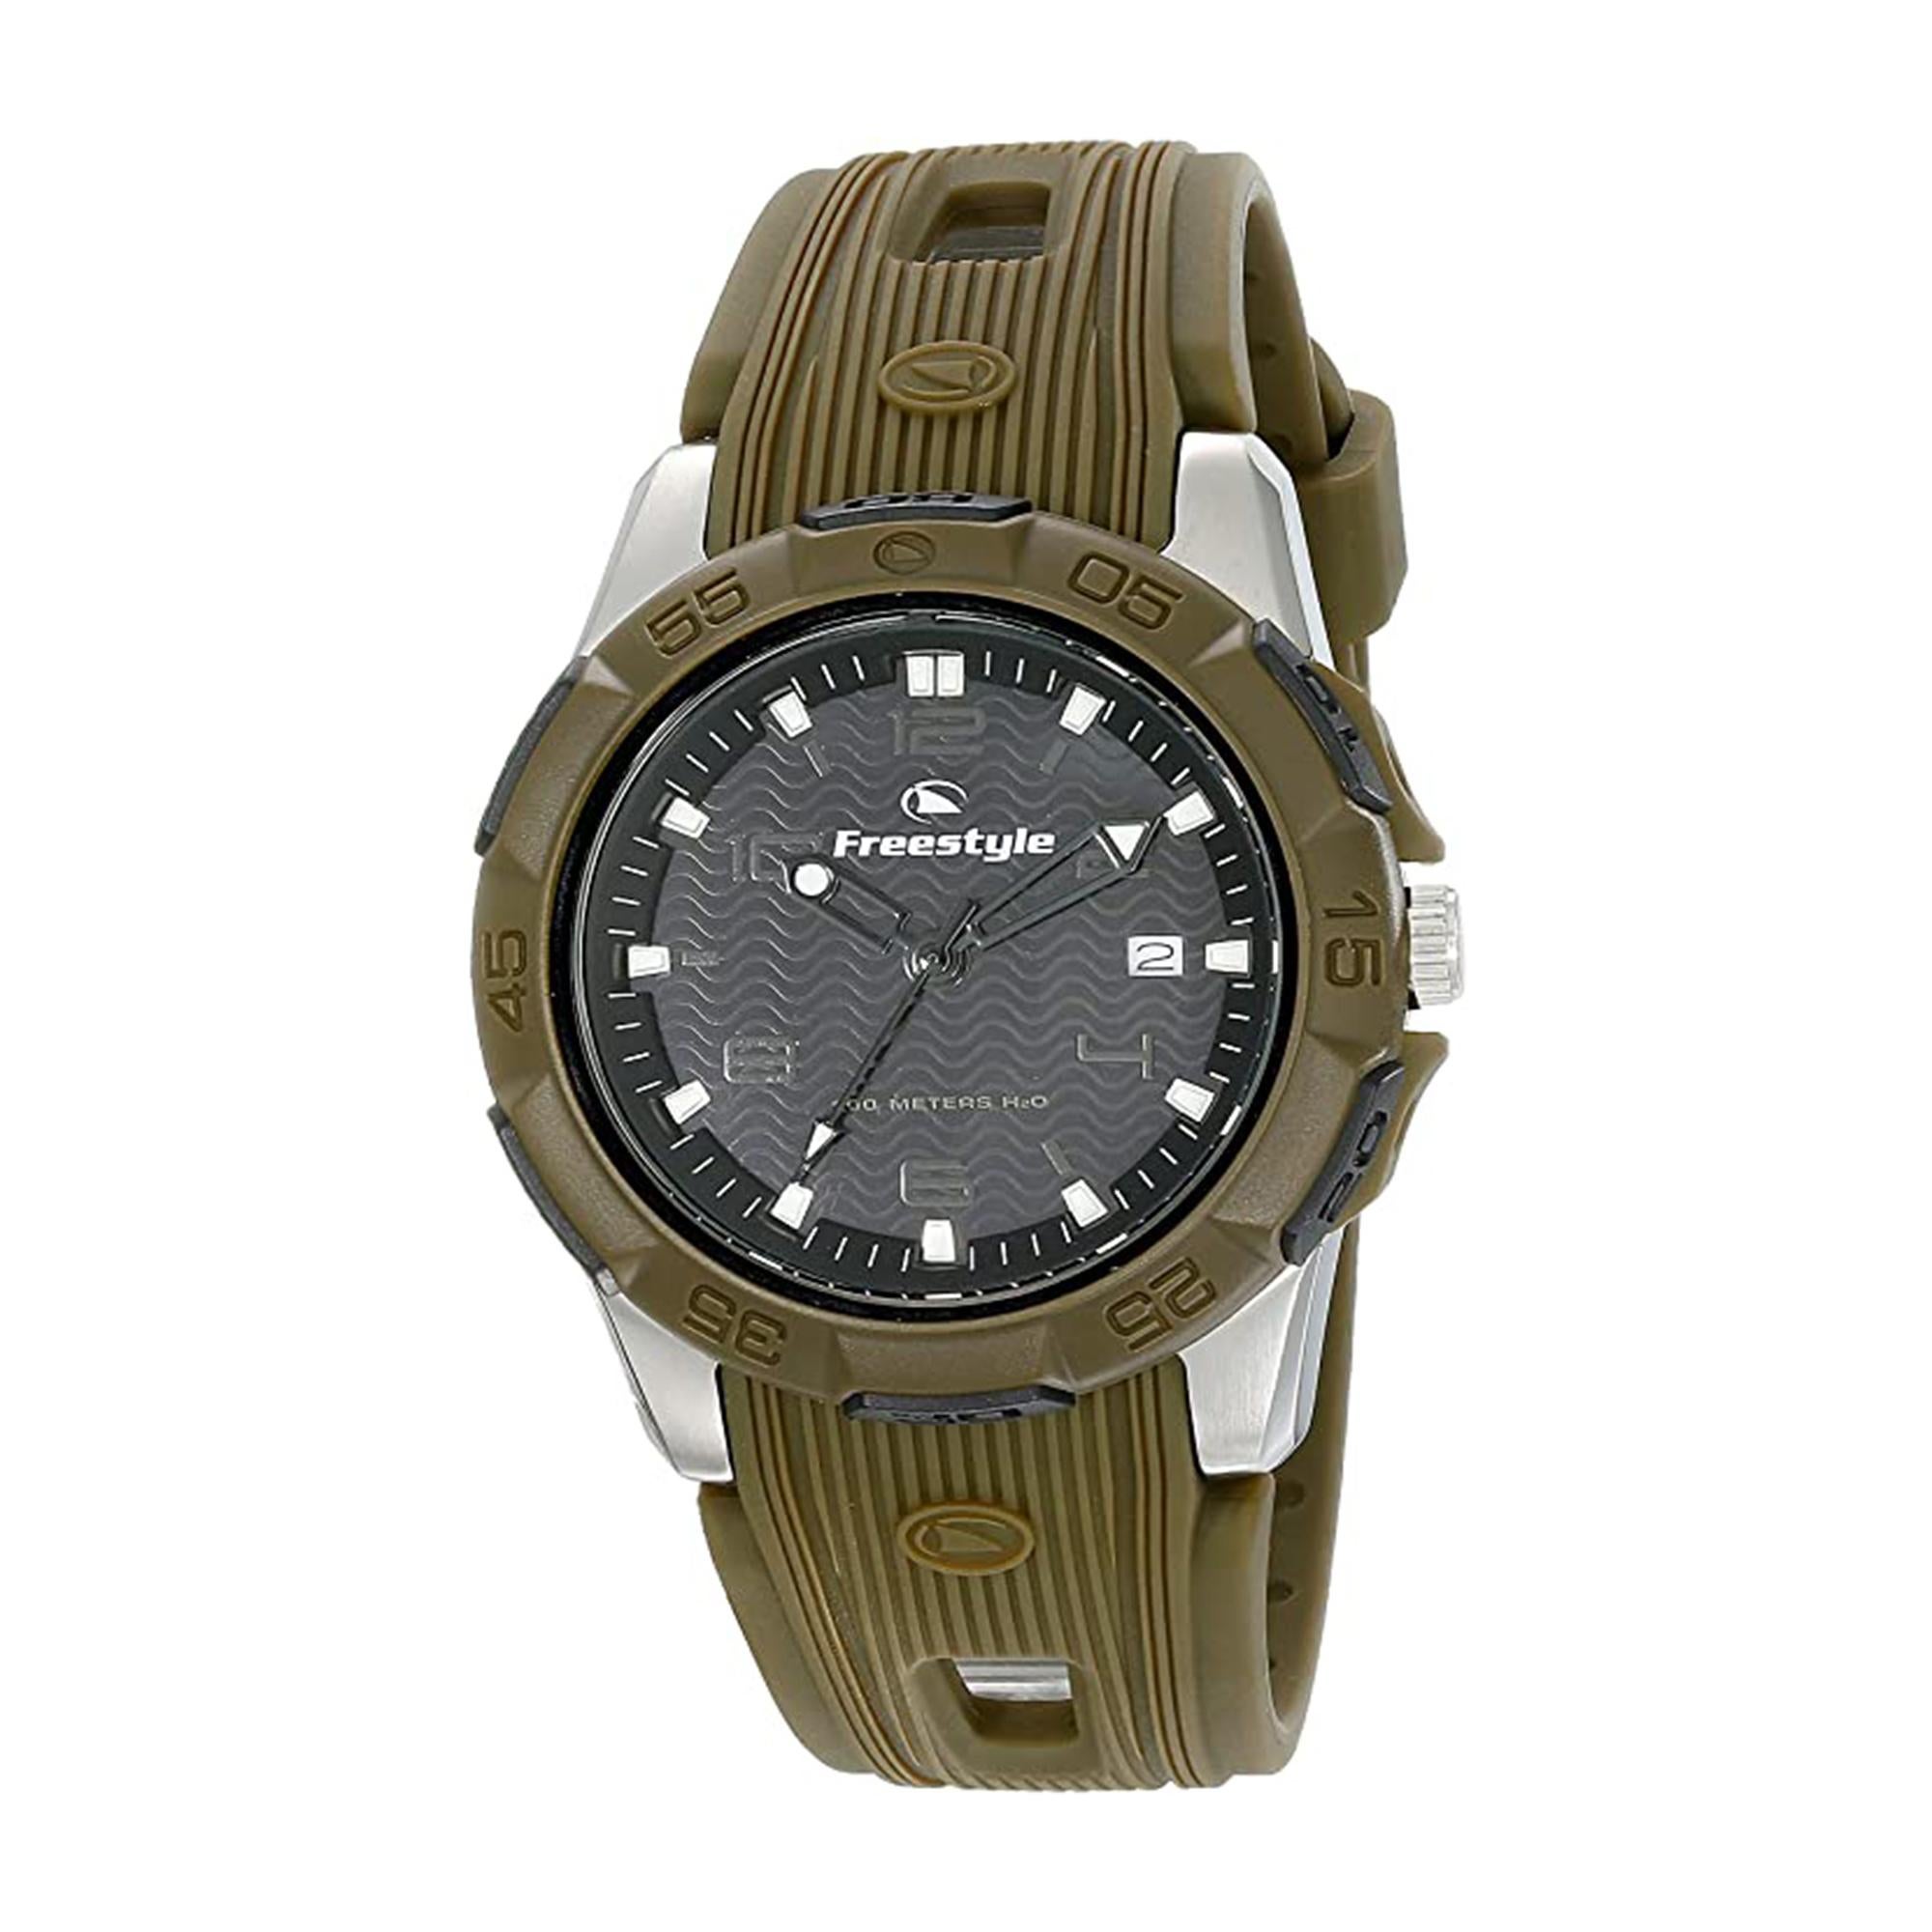 This timepiece has comfortable polyurethane strap with stainless steel case and buckle, durable hardened mineral crystal, night vision backlight, push-down crown and water-resistant to 330 feet (100m).
Japanese-quartz movement
Case Diameter: 40mm